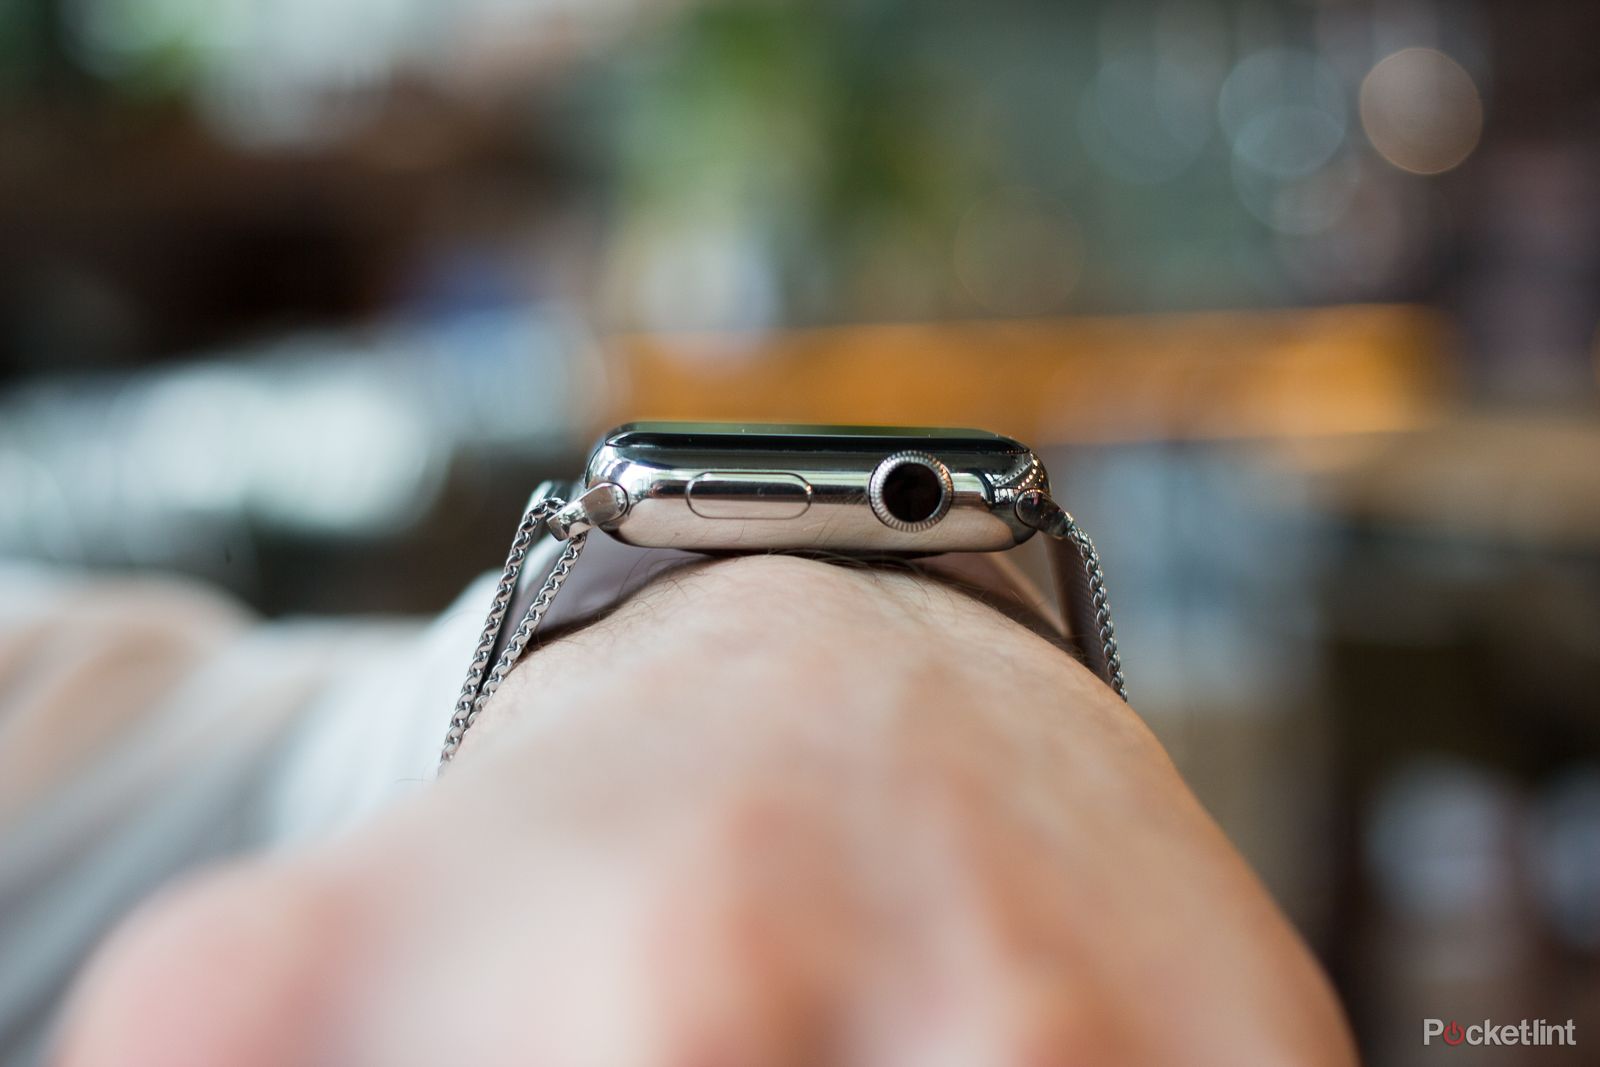 apple watch review image 25